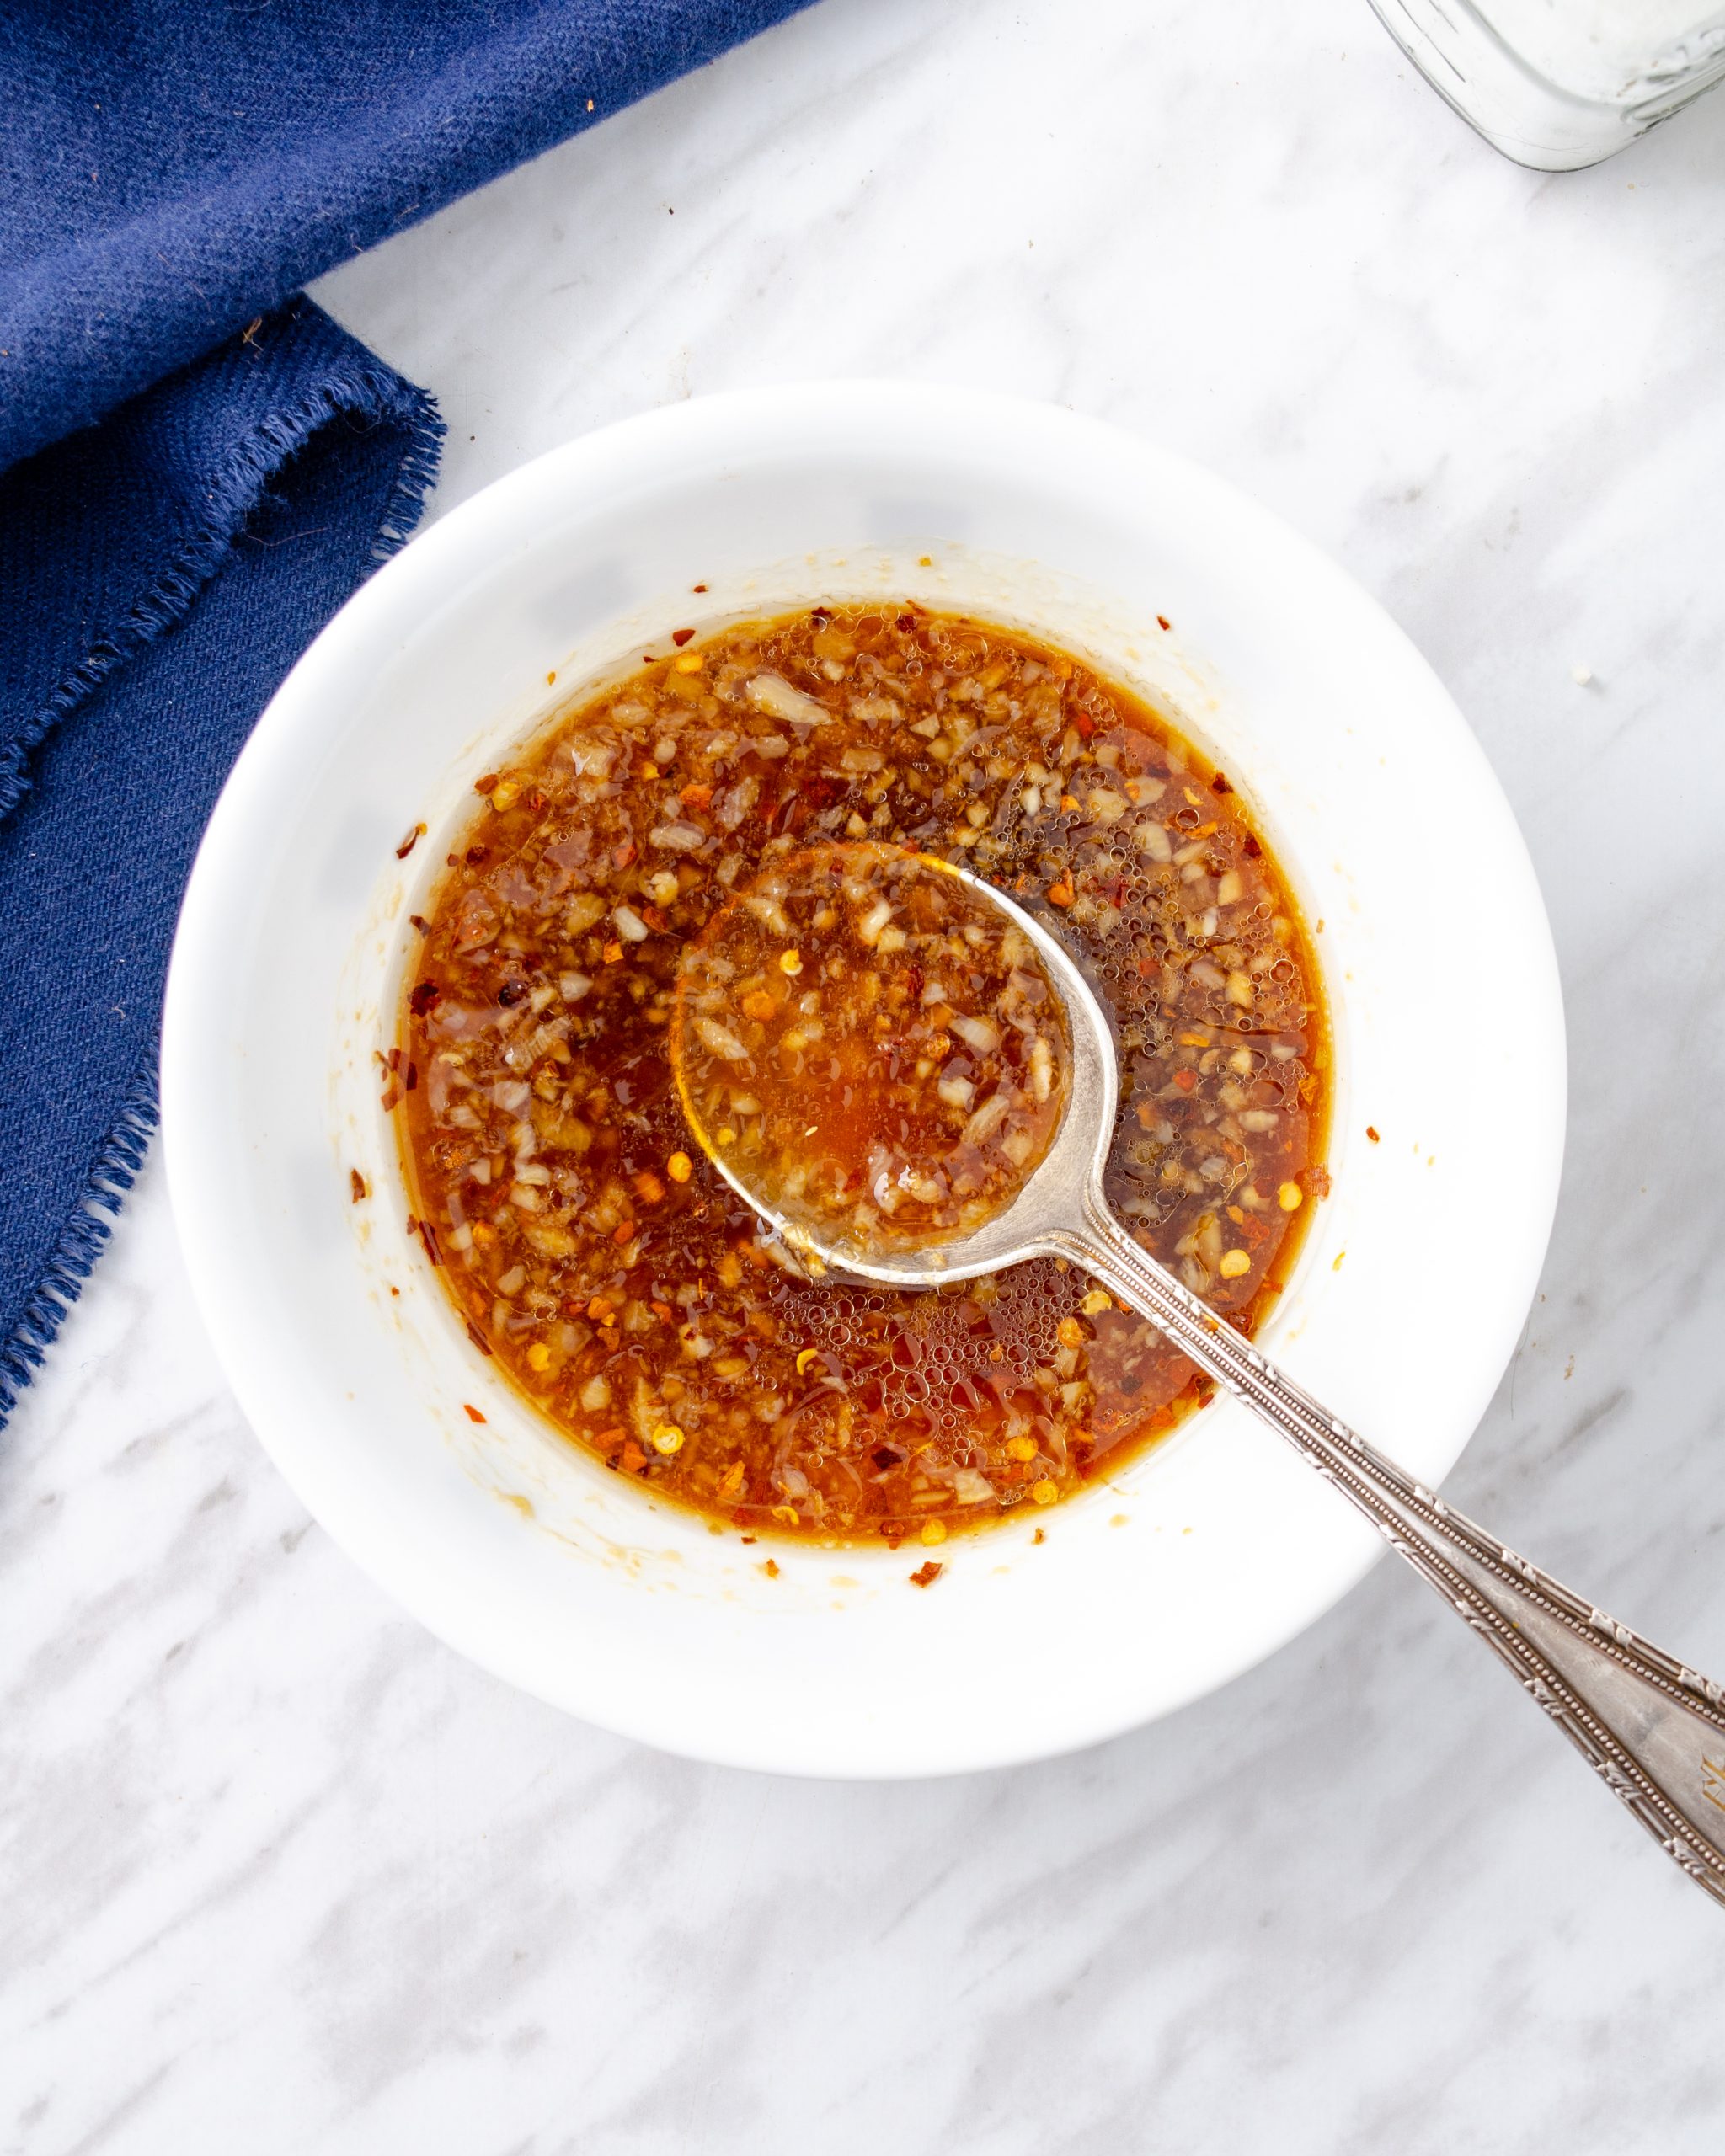 In a mixing bowl, combine the honey, soy sauce, chili flakes, ginger paste, and minced garlic.